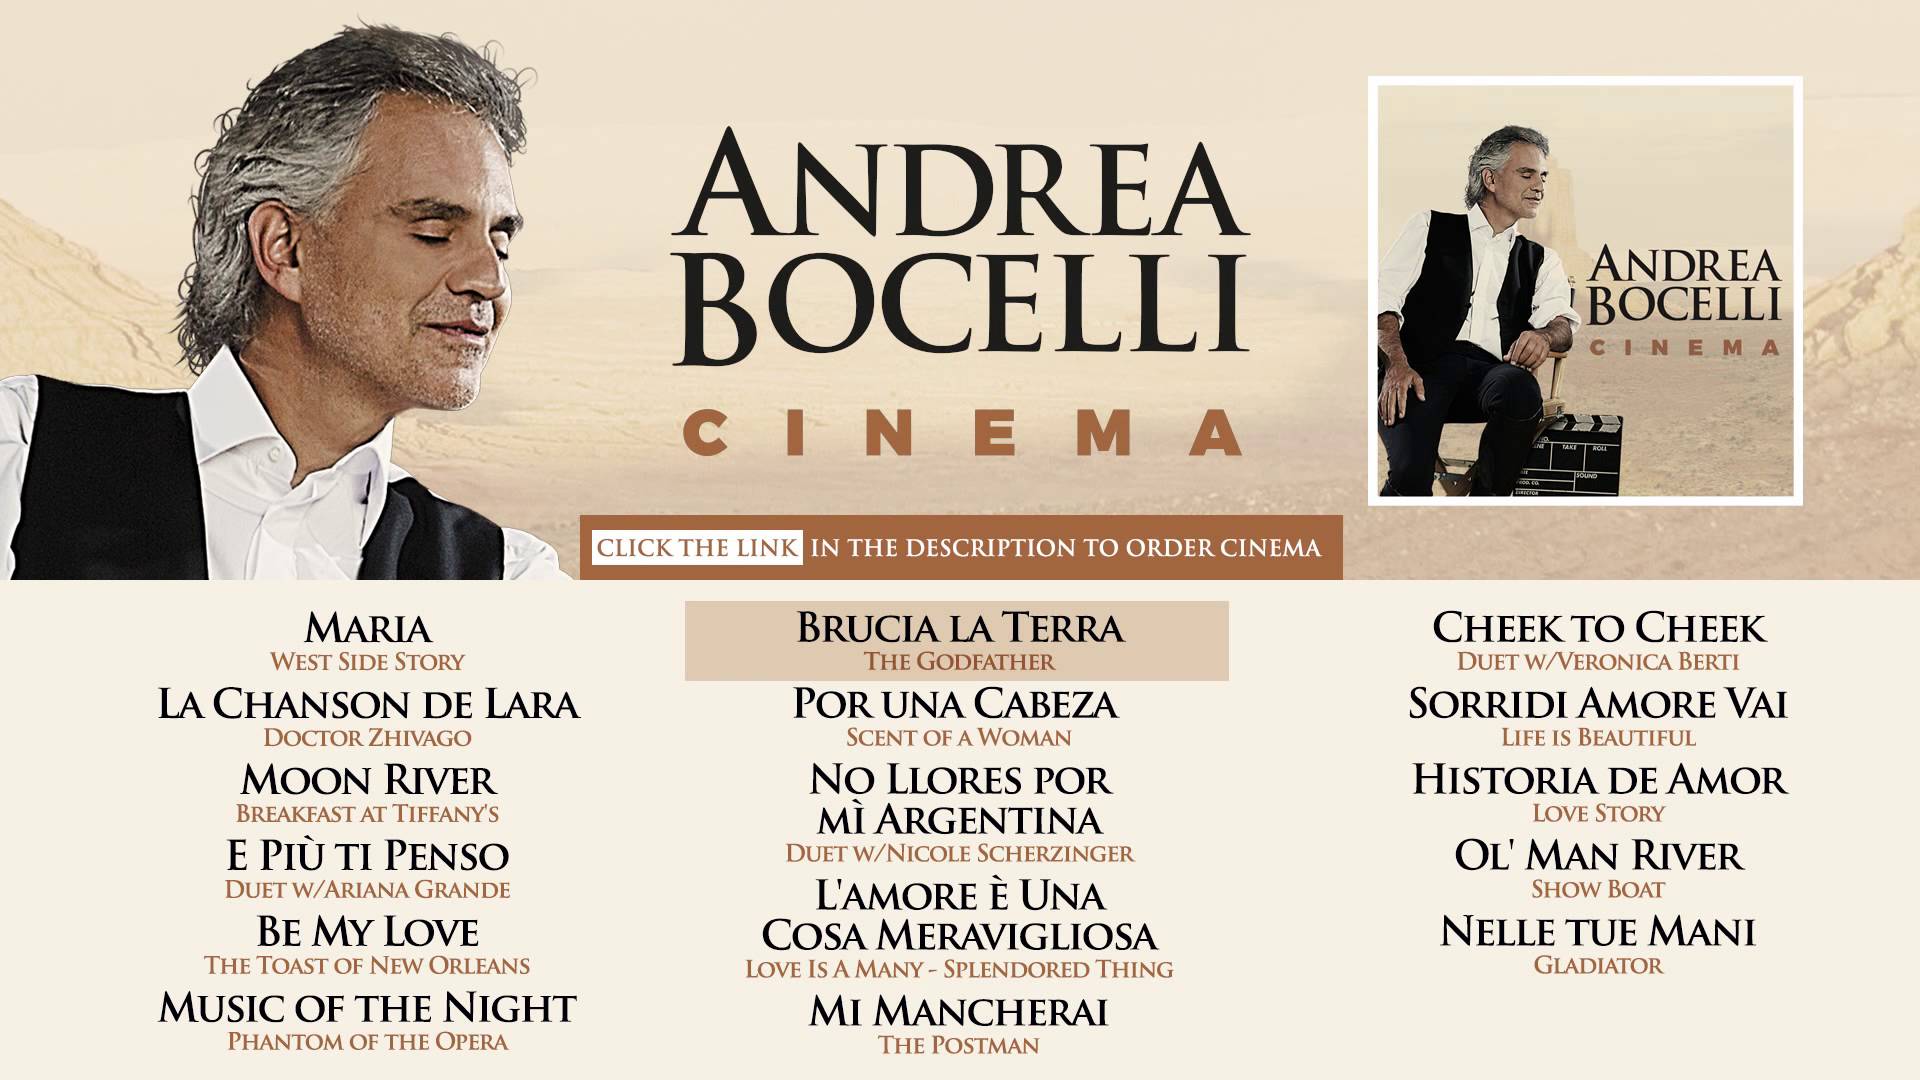 Andrea Bocelli reschedules San Jose concert to accommodate Stanley